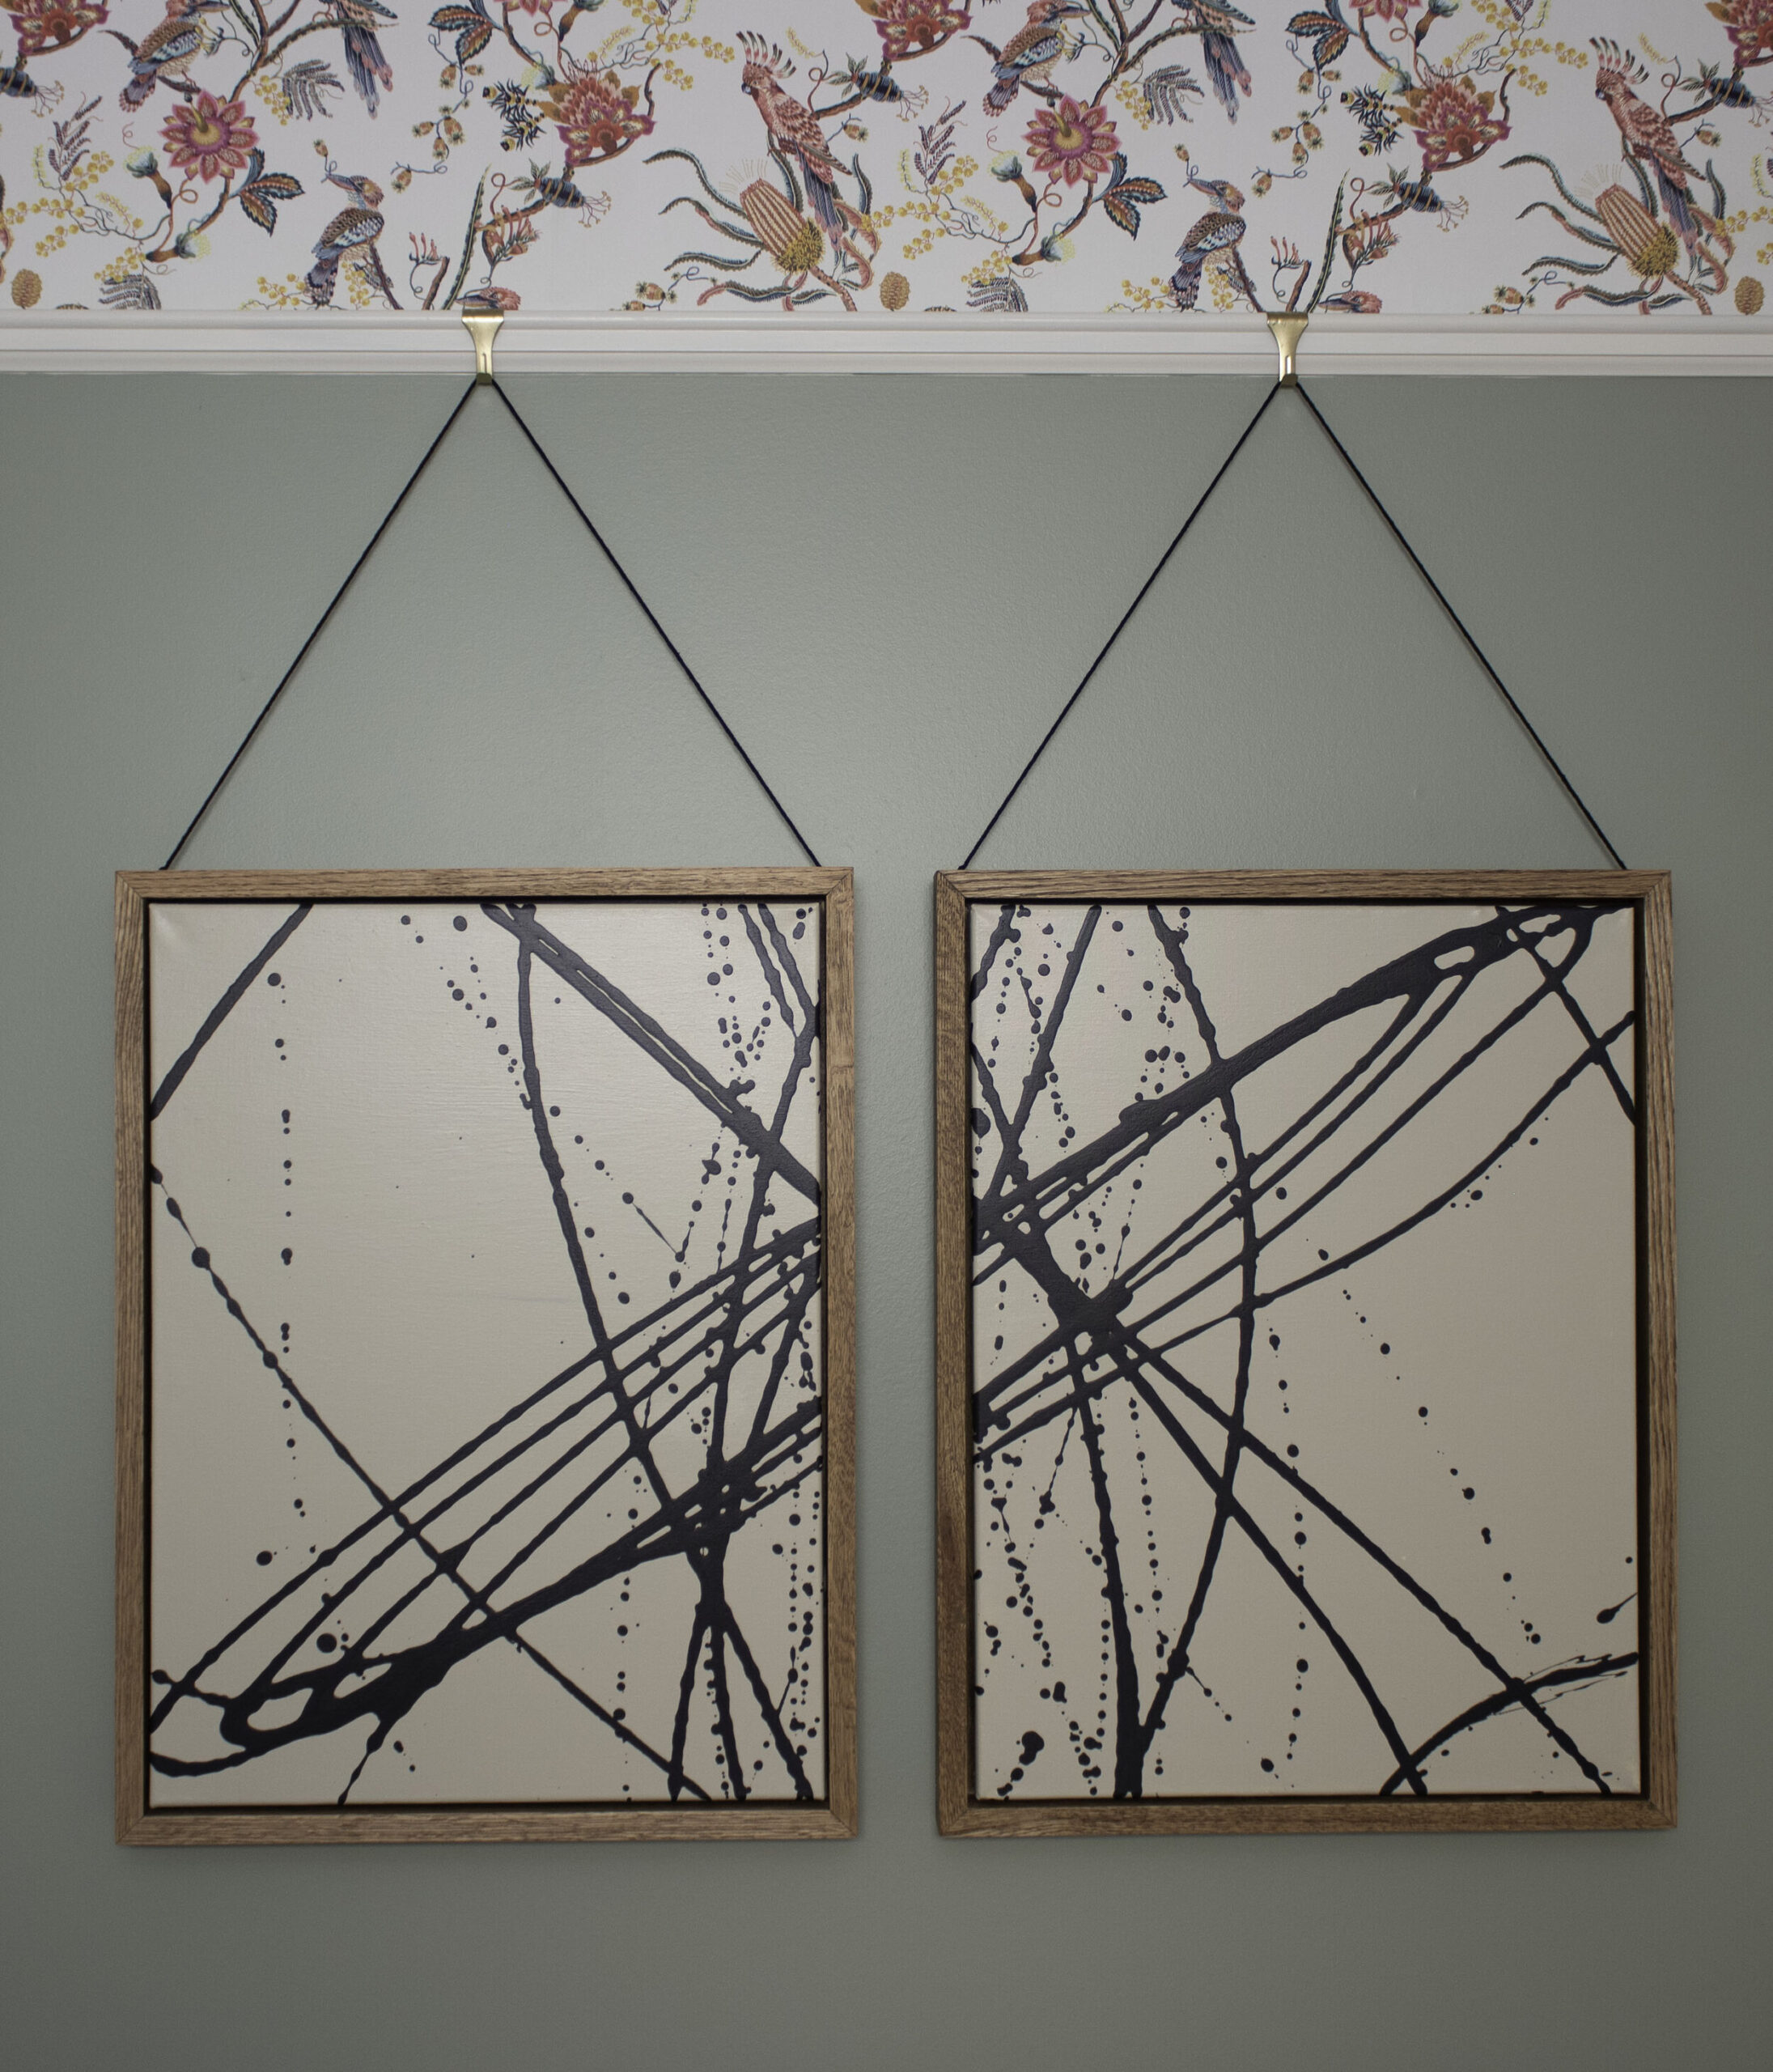 black and beige abstract art with oak wood frames hanging by strings from a chair rail on a green wall